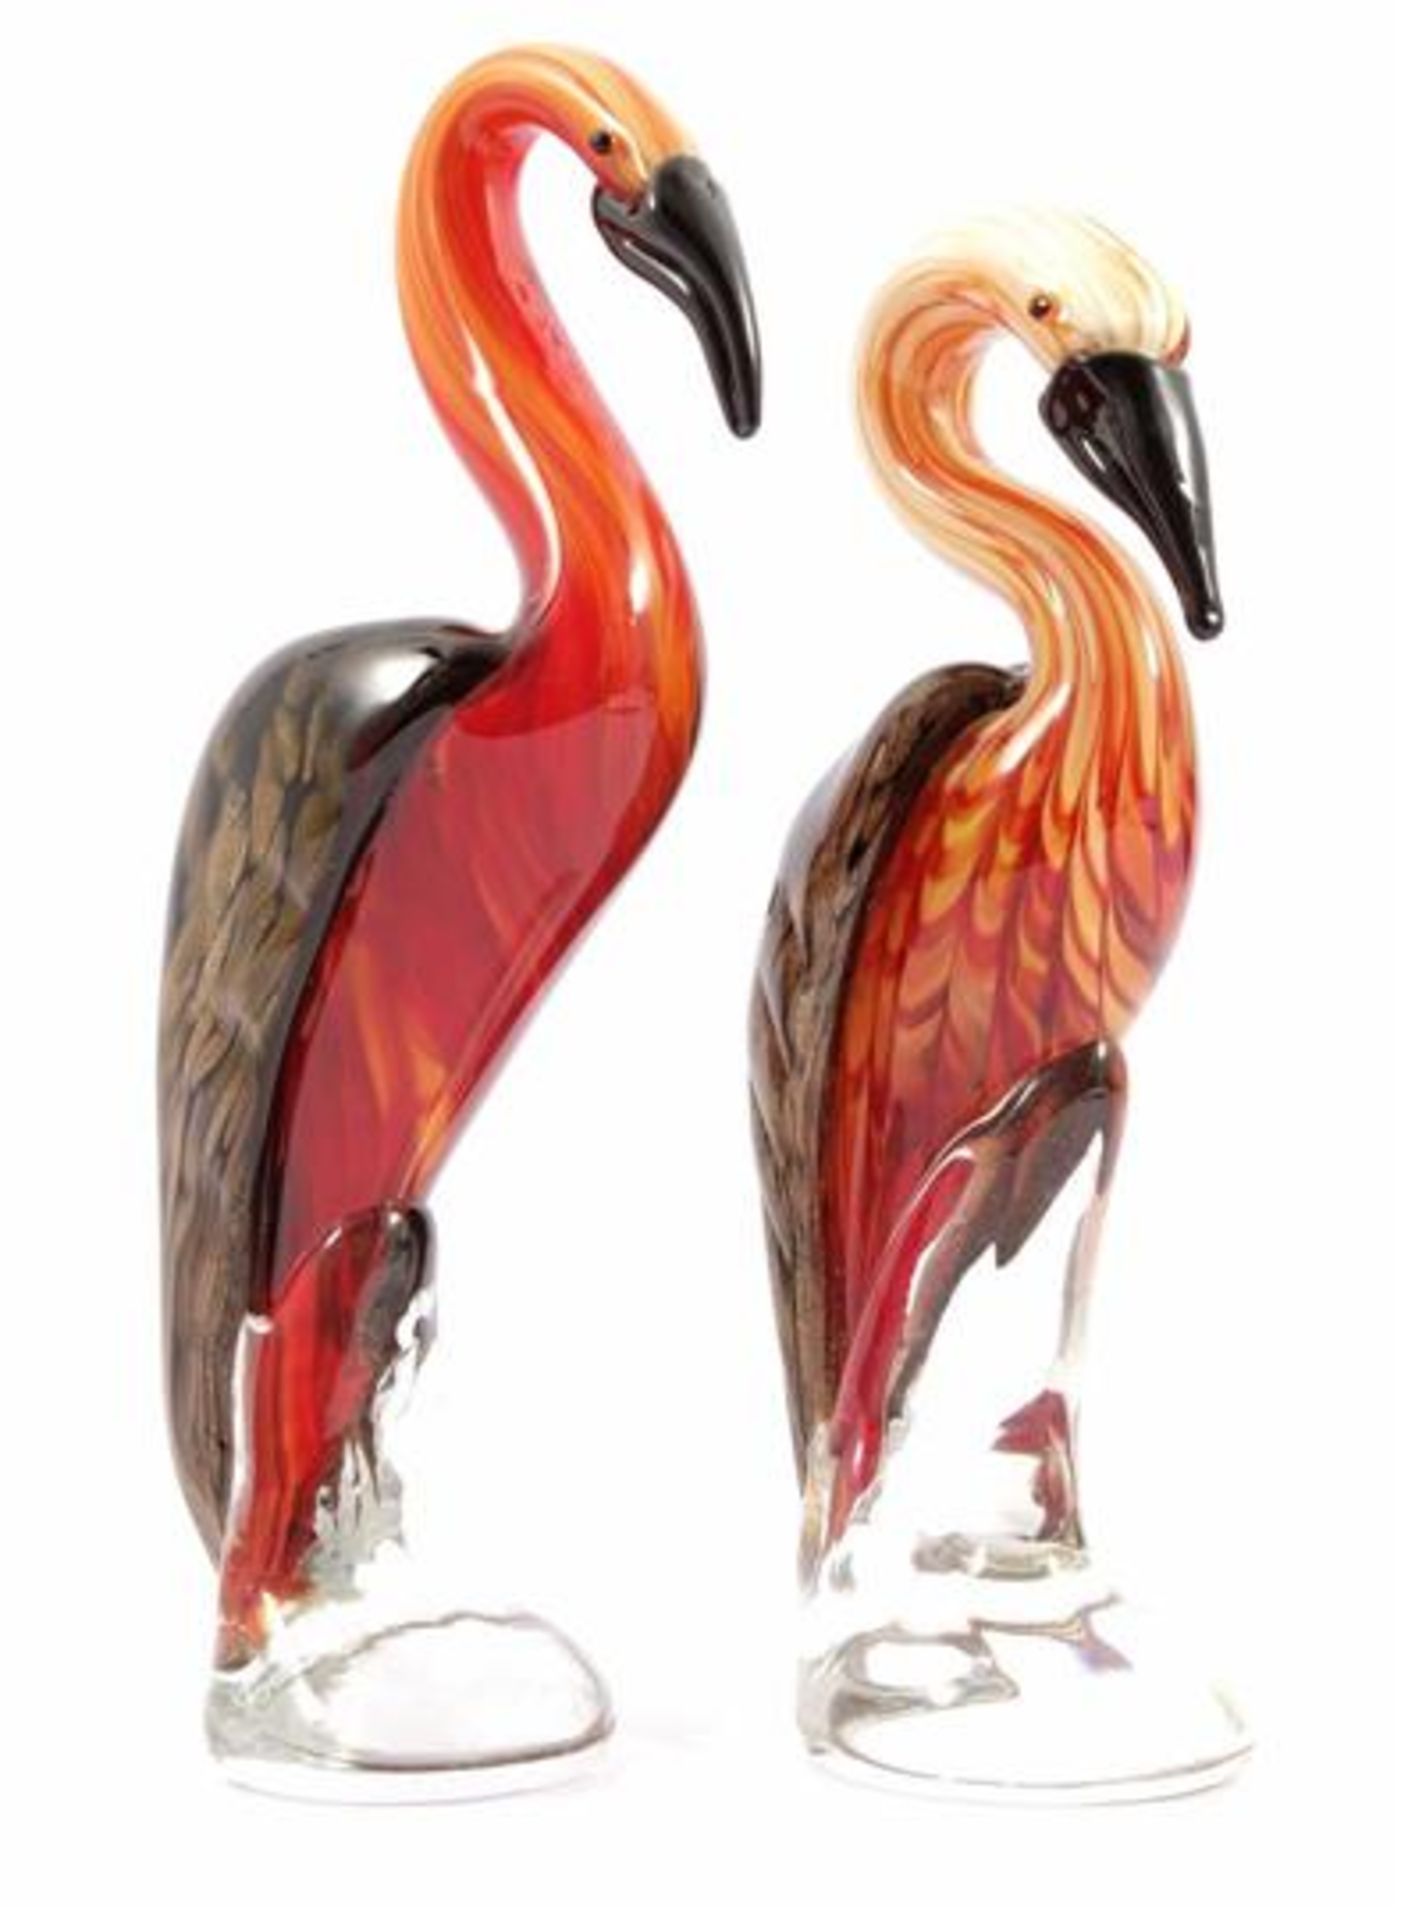 2 colored glass cranes 30 cm and 33 cm high